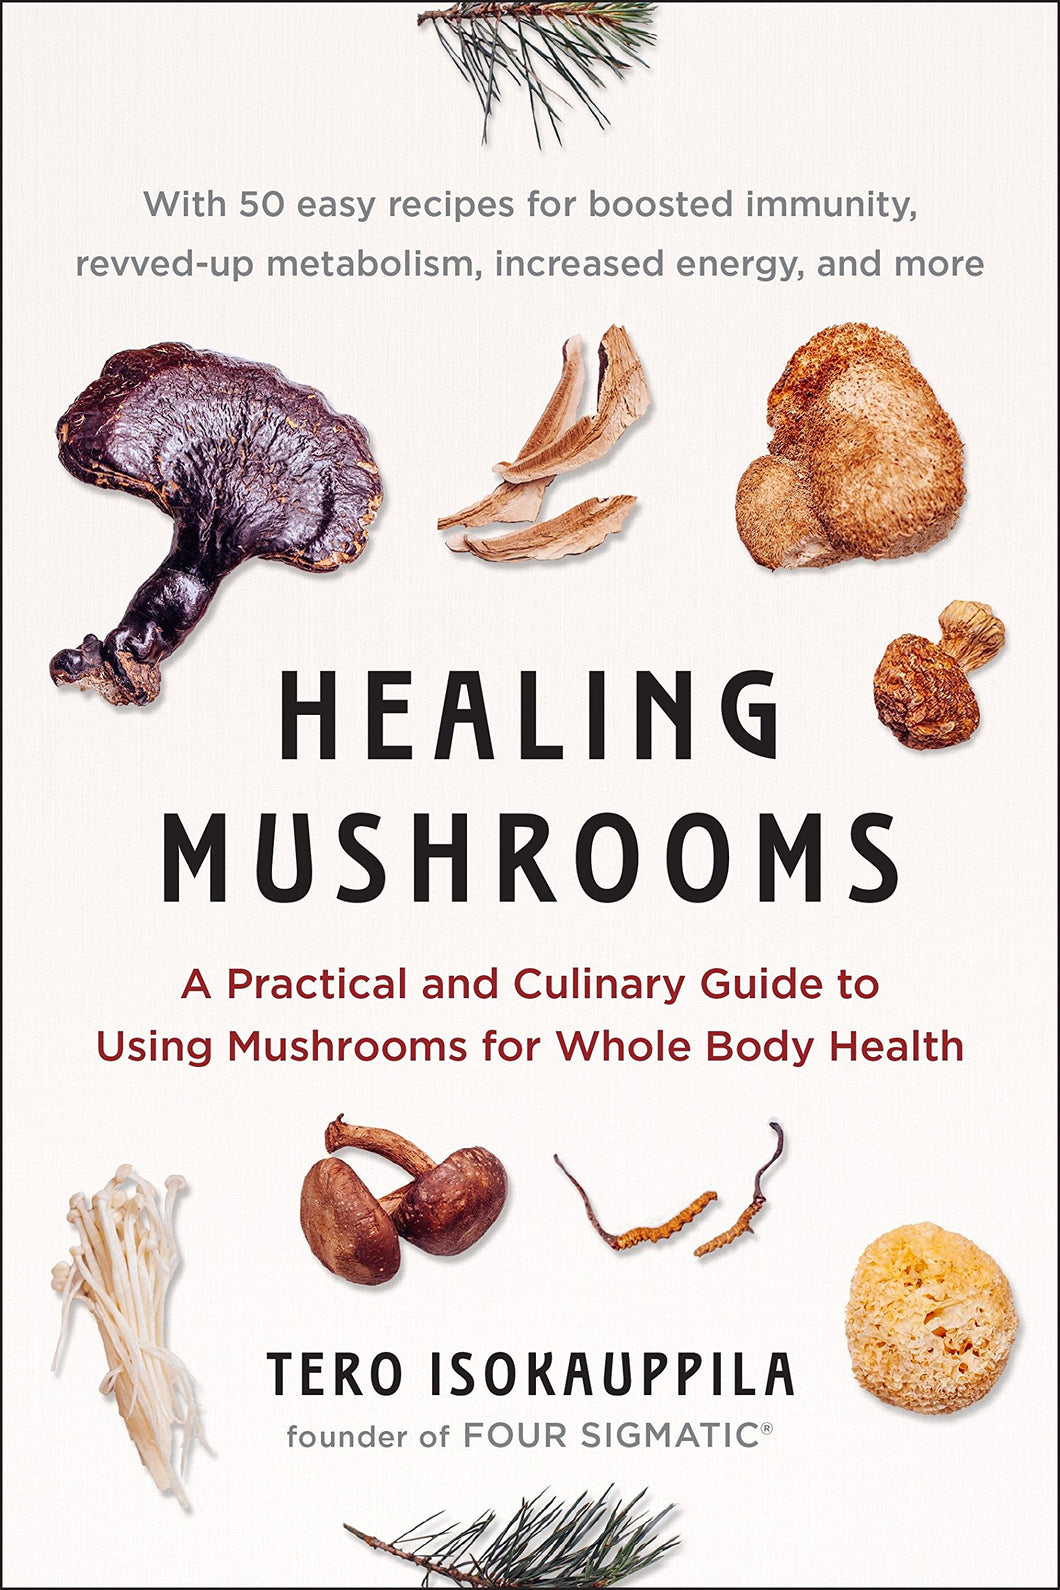 Healing Mushrooms: A Practical and Culinary Guide to Using Mushrooms for Whole Body Health [Tero Isokauppila]